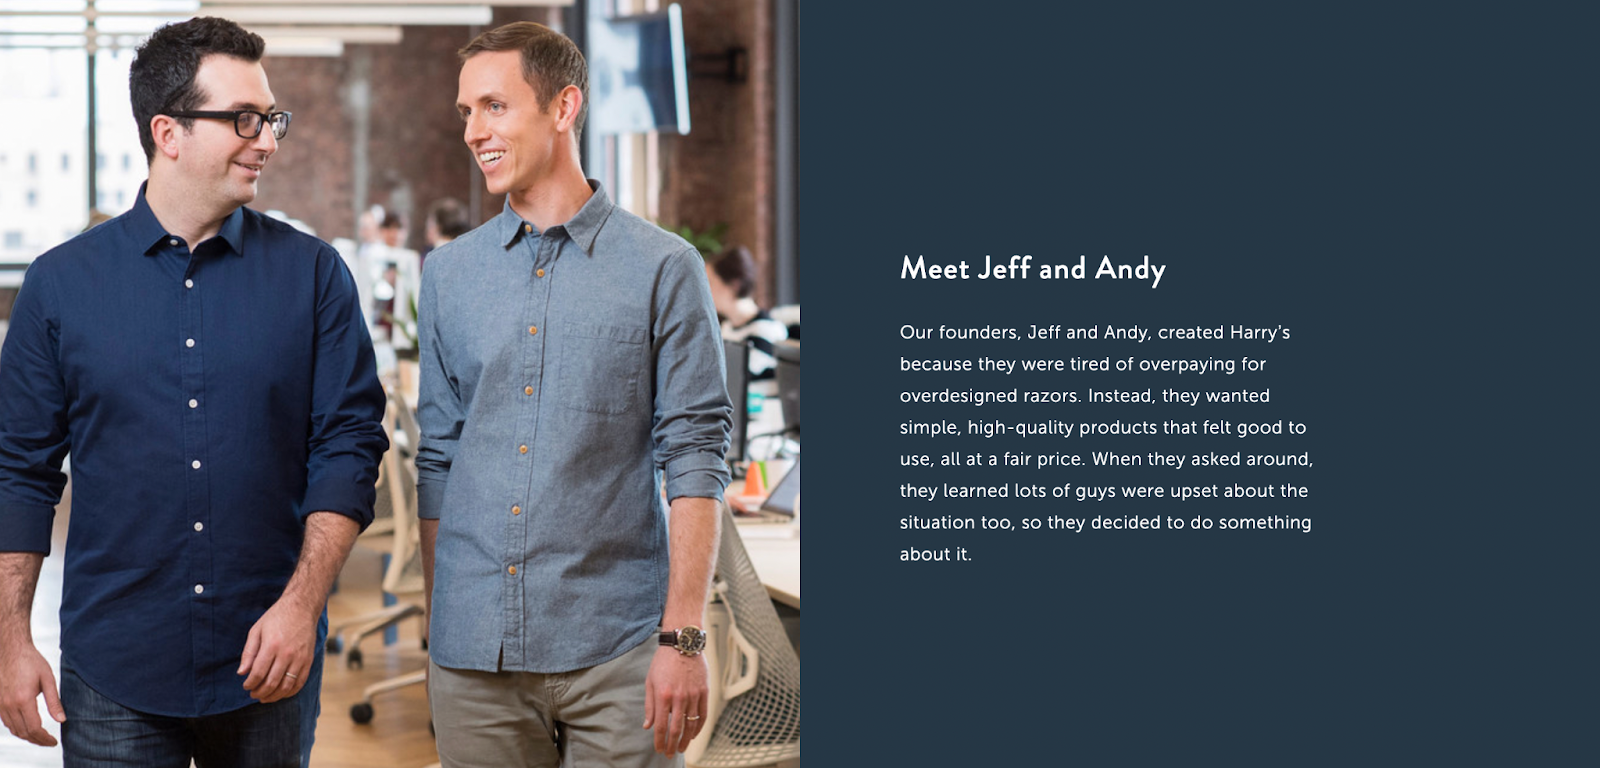 Brand story of the about page describes why Jeff and Andy created Harry's. In the world of confusing razors, they wanted a simple product at a great cost. 